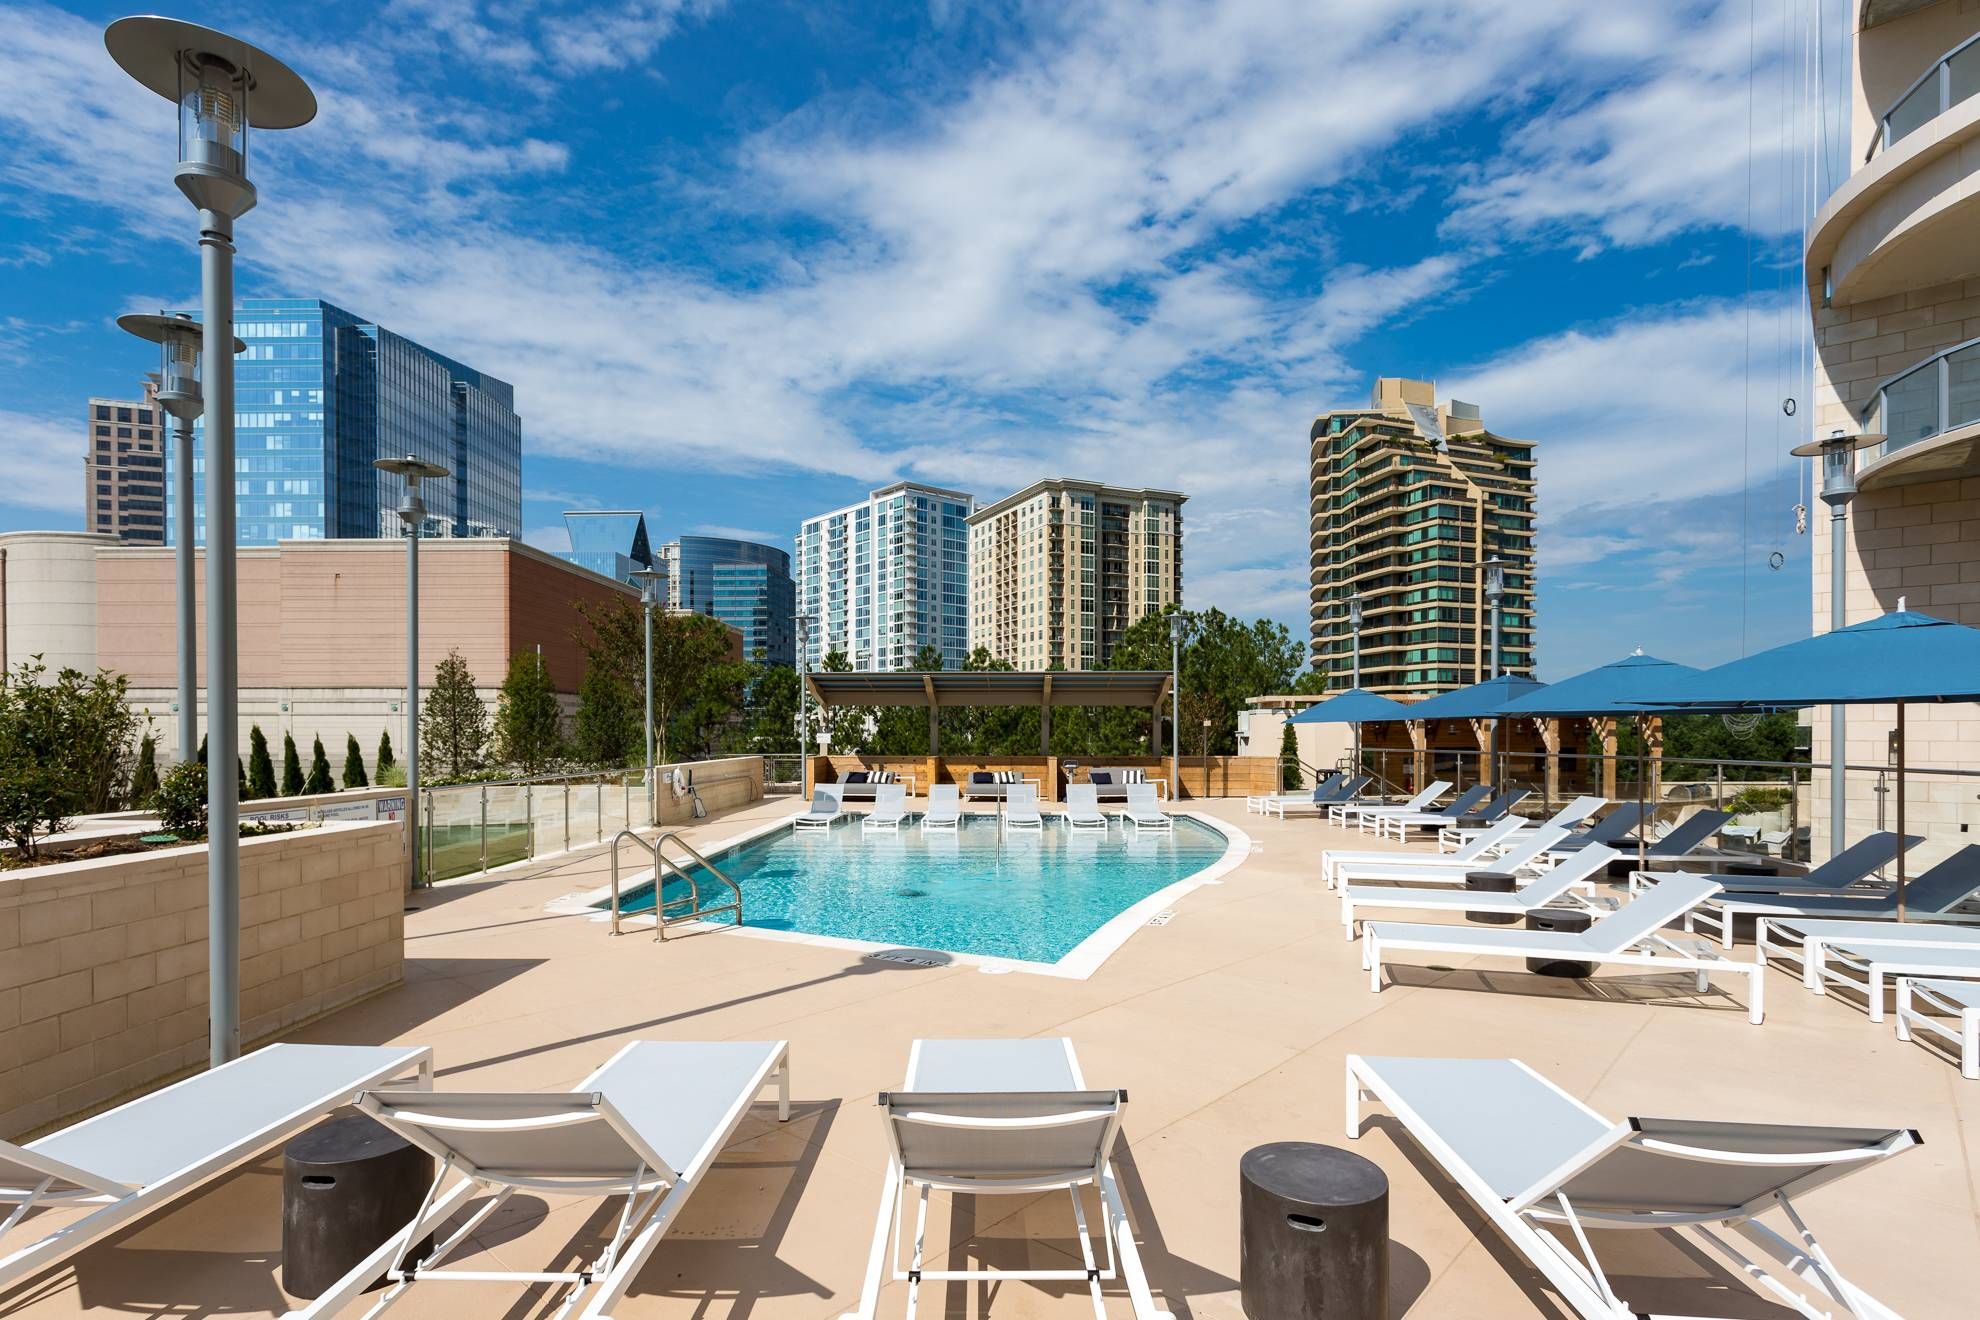 The Huntley resident pool with lounge chairs overlooking city skyline.